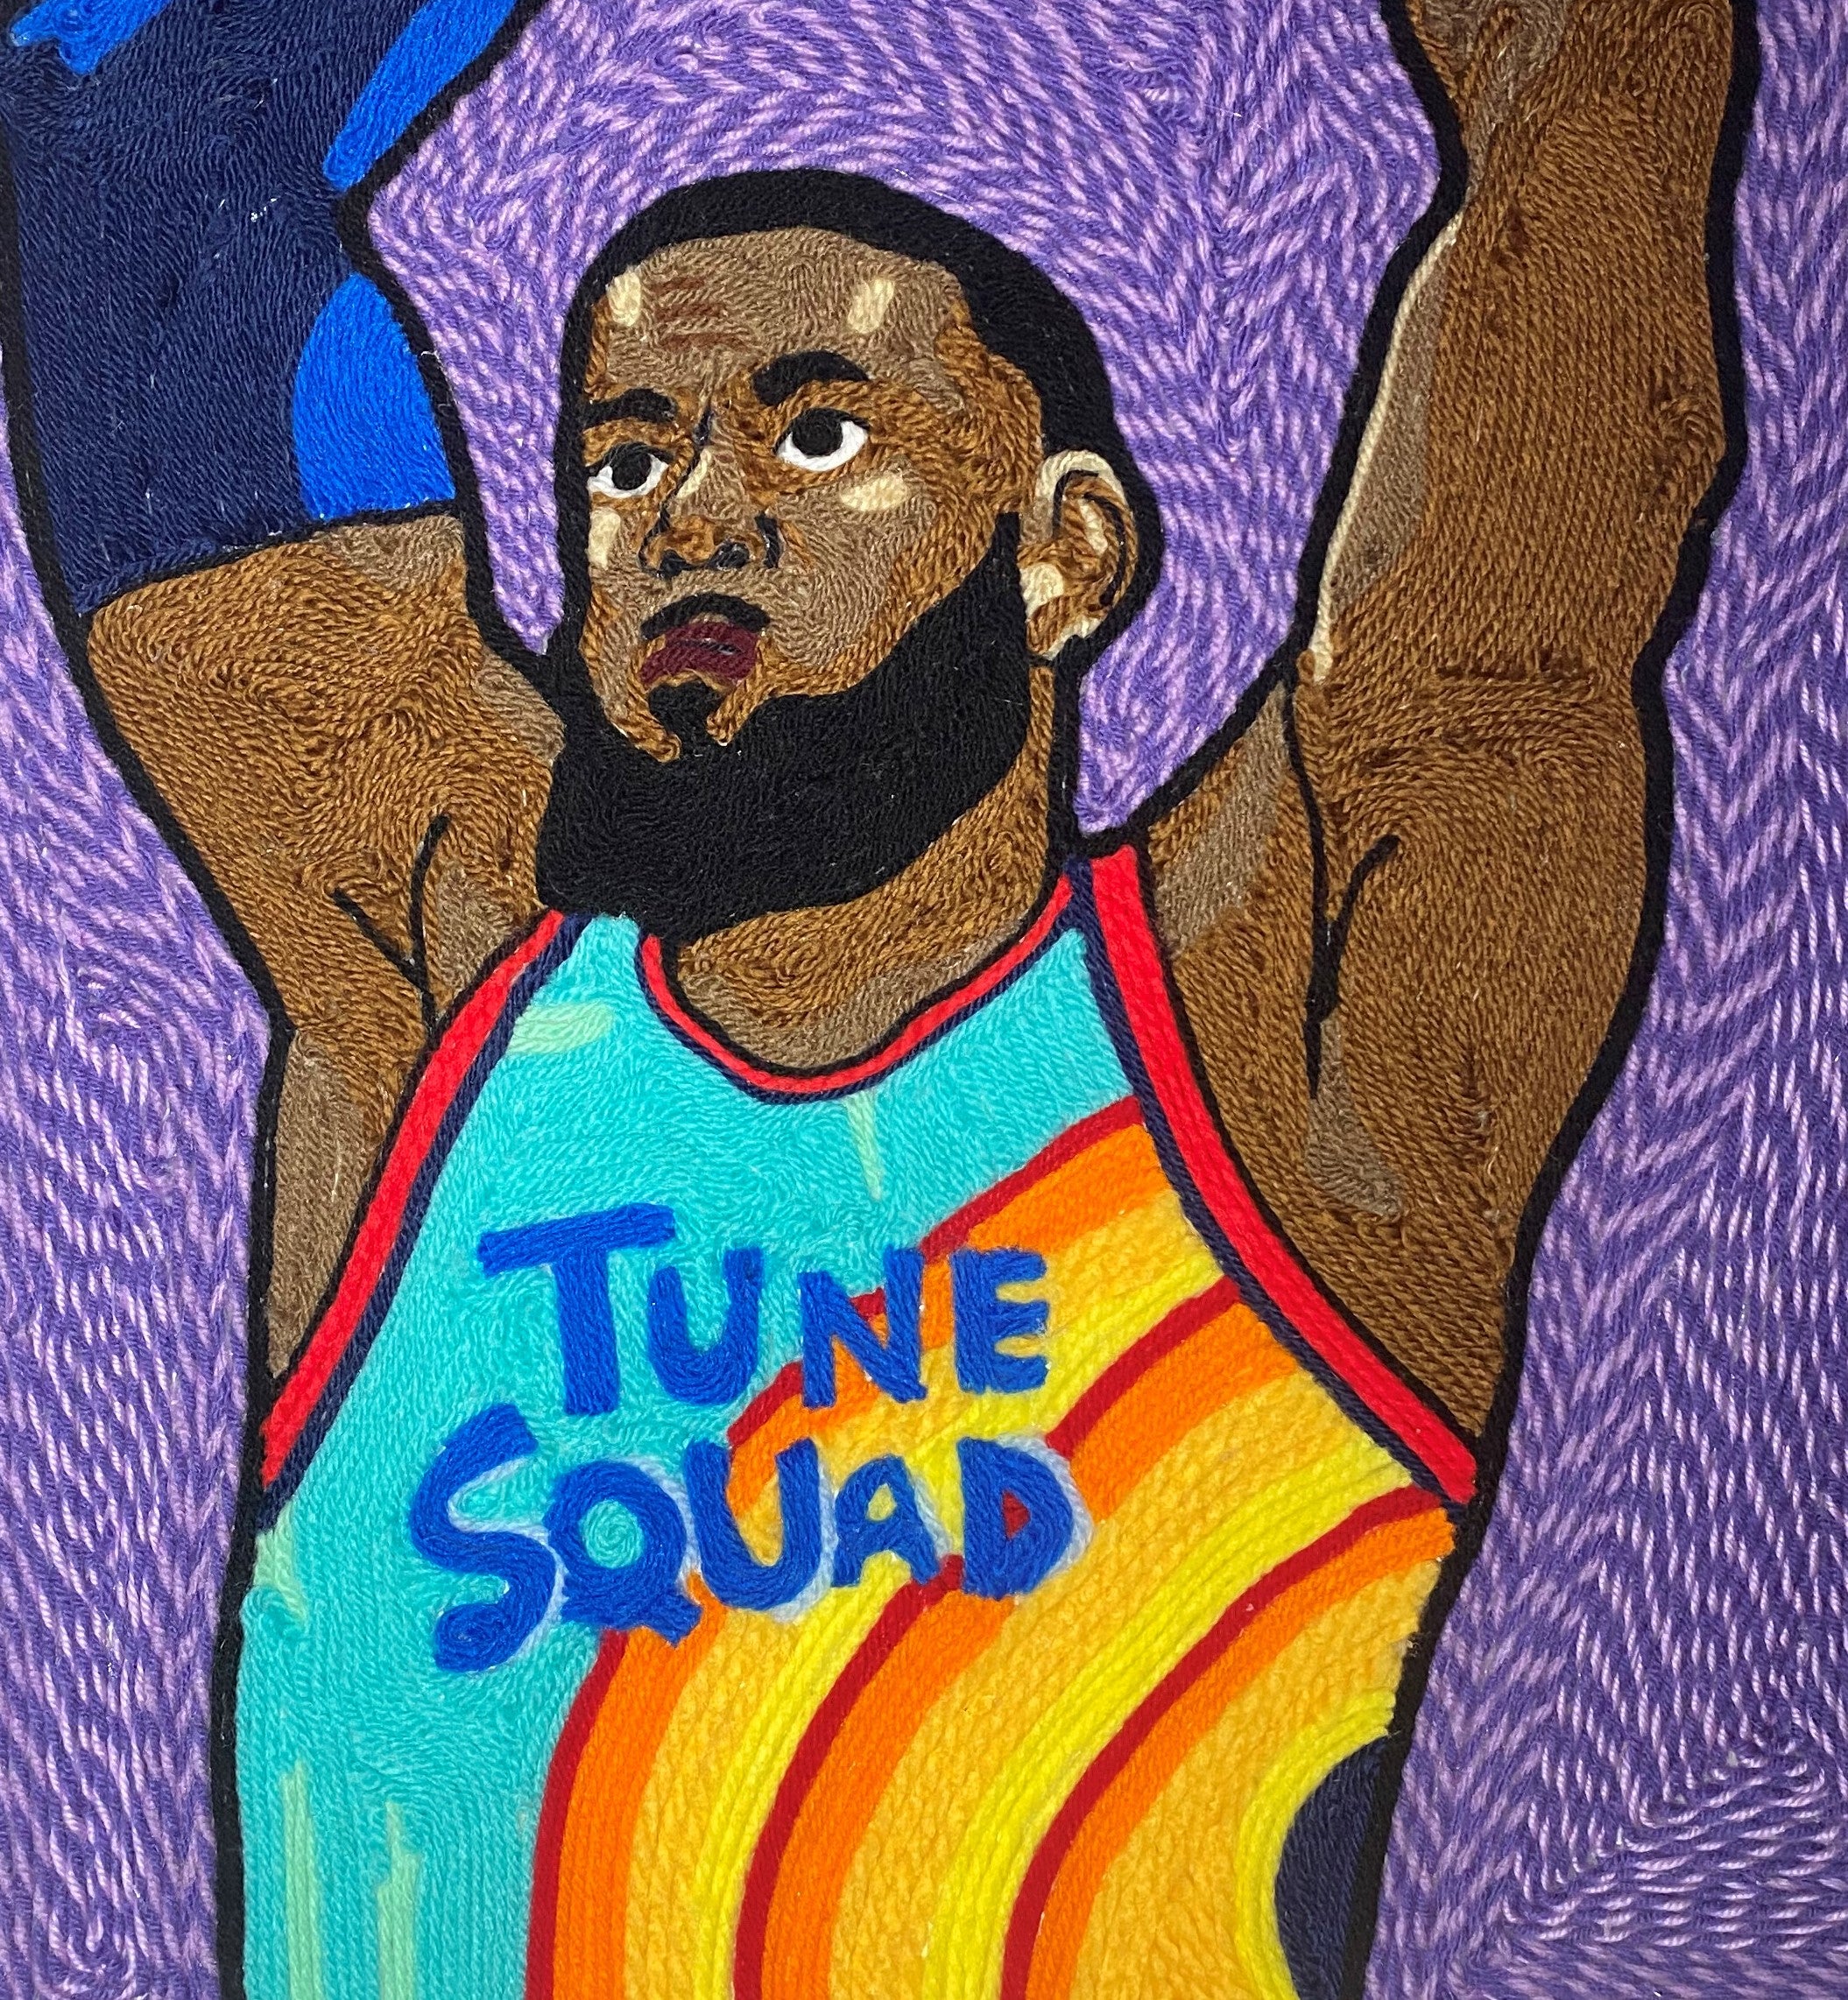 Lebron James - Space Jam - A New Legacy - Yarn Painting